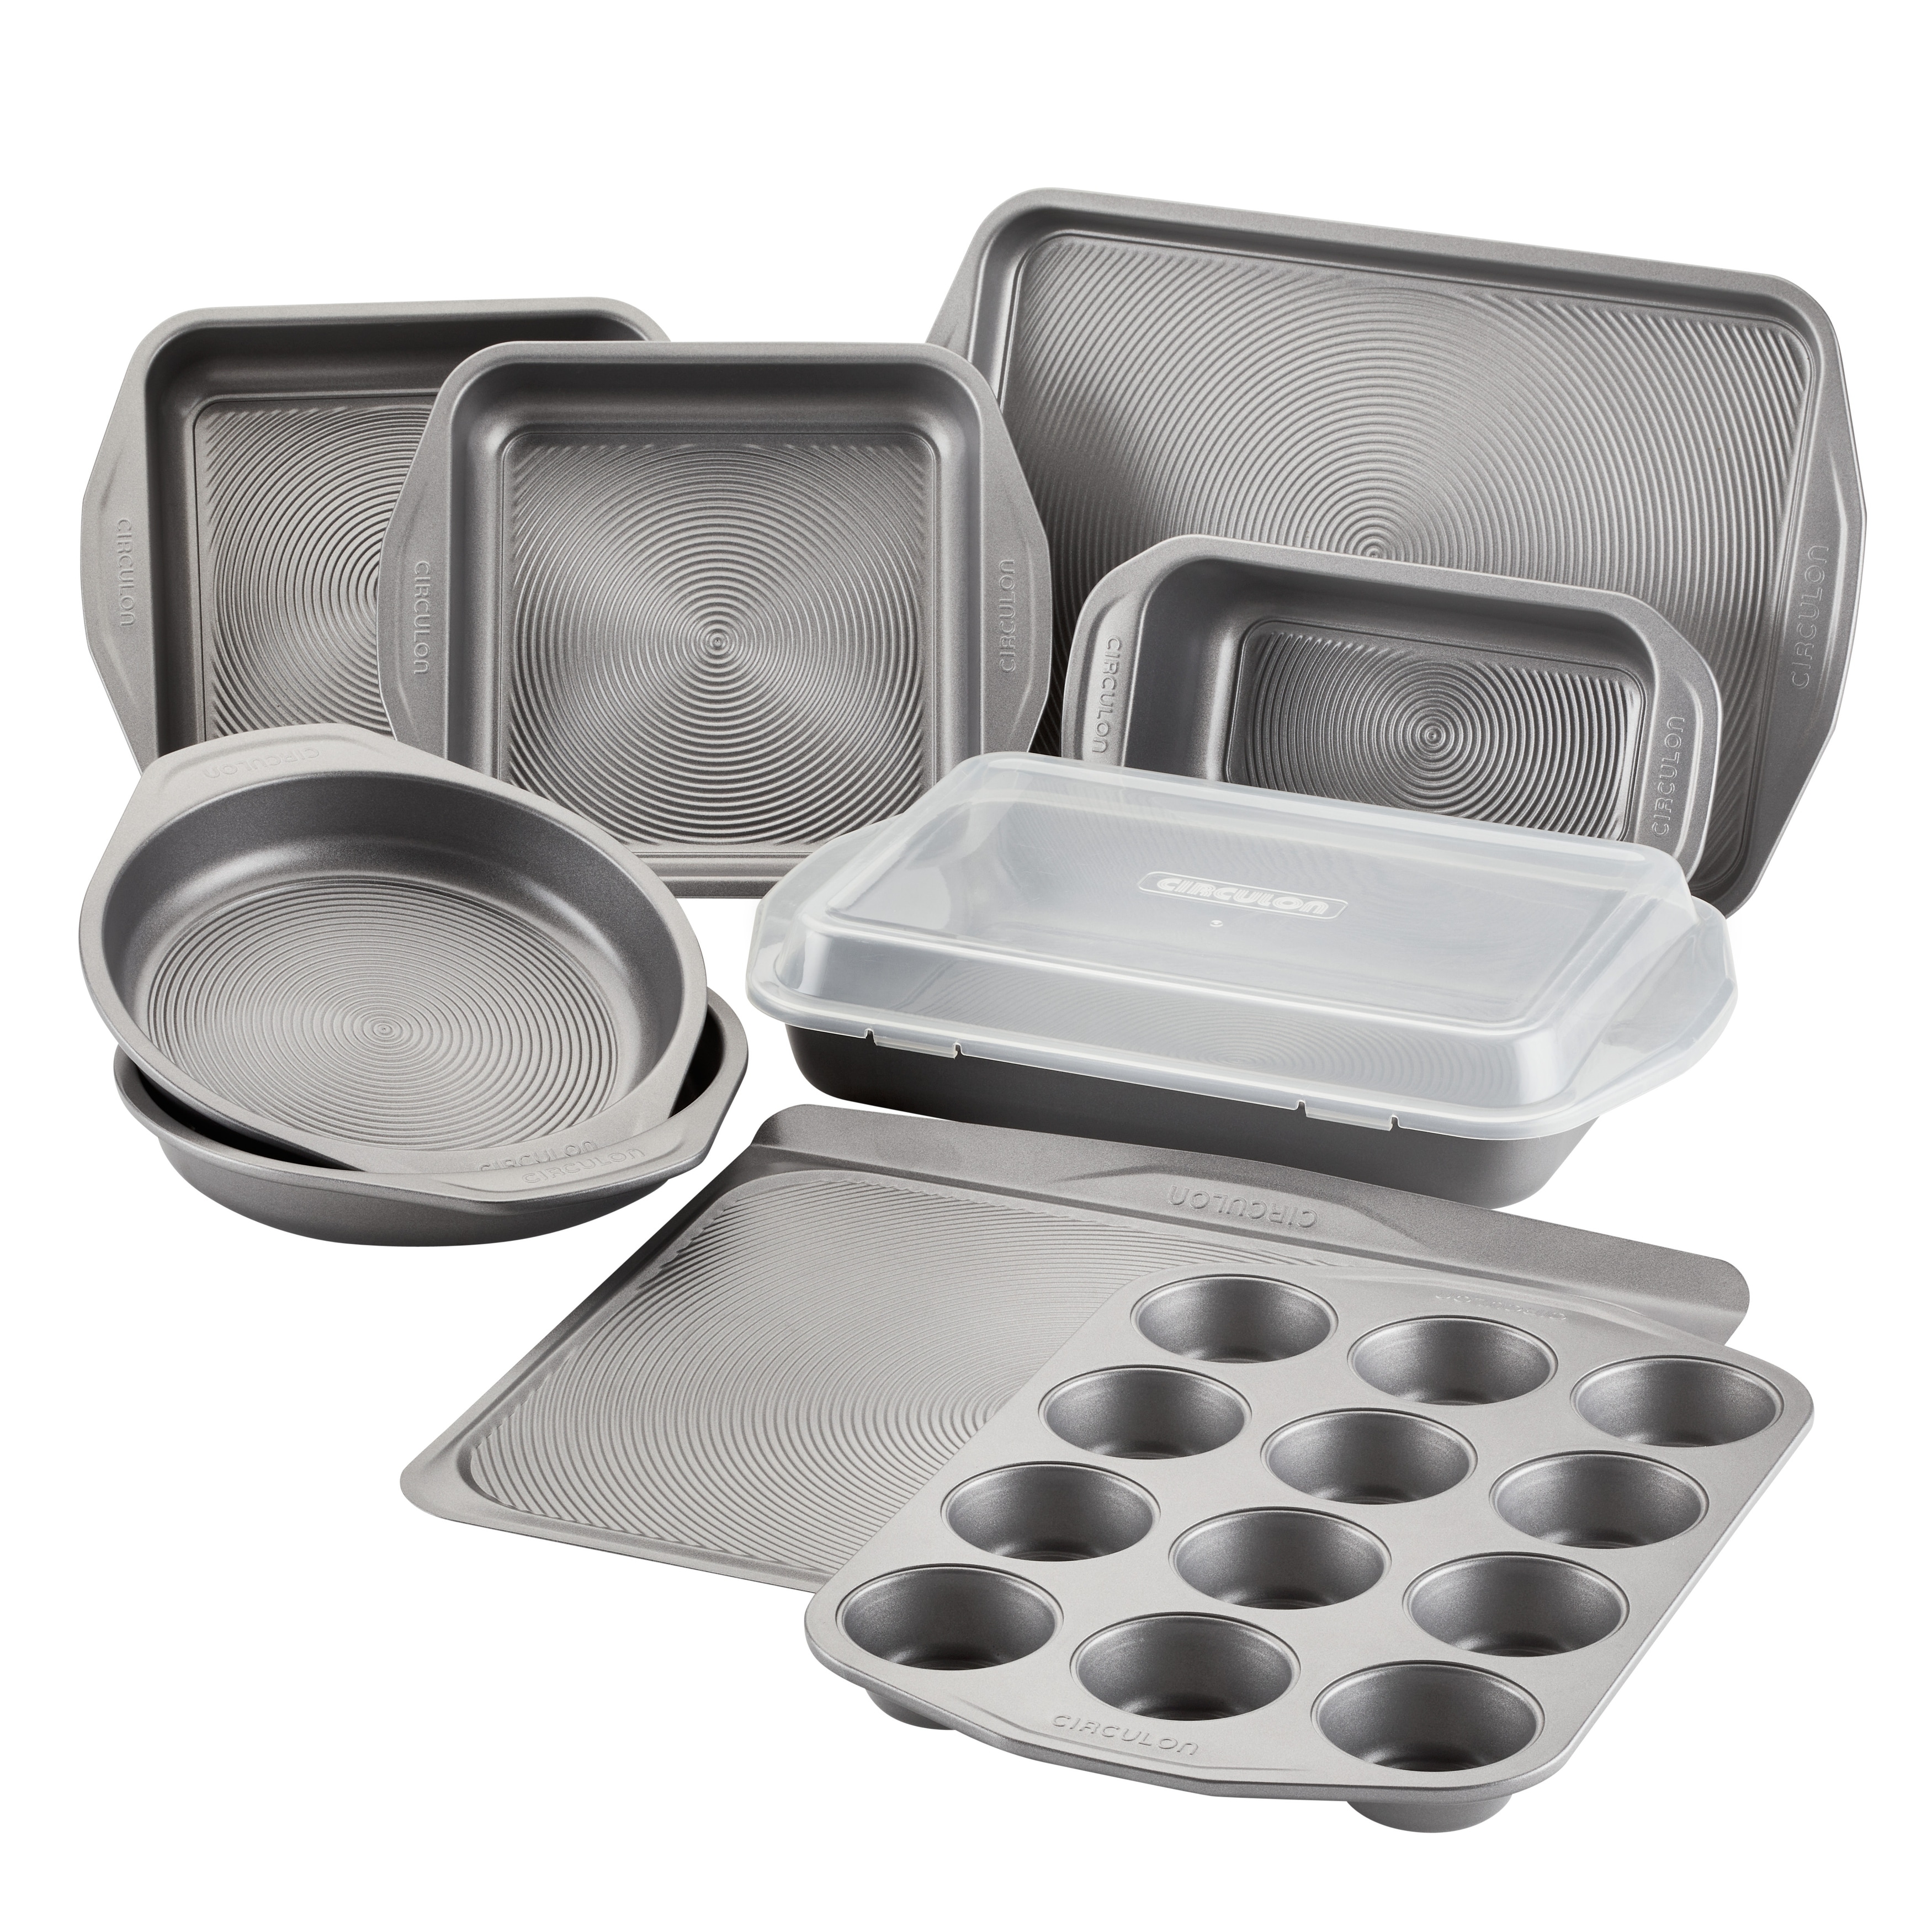 https://ak1.ostkcdn.com/images/products/is/images/direct/4ffd8fae17c764321e010fa0786a470f93c54fa9/Circulon-Total-Nonstick-Bakeware-Set%2C-10-Piece%2C-Gray.jpg